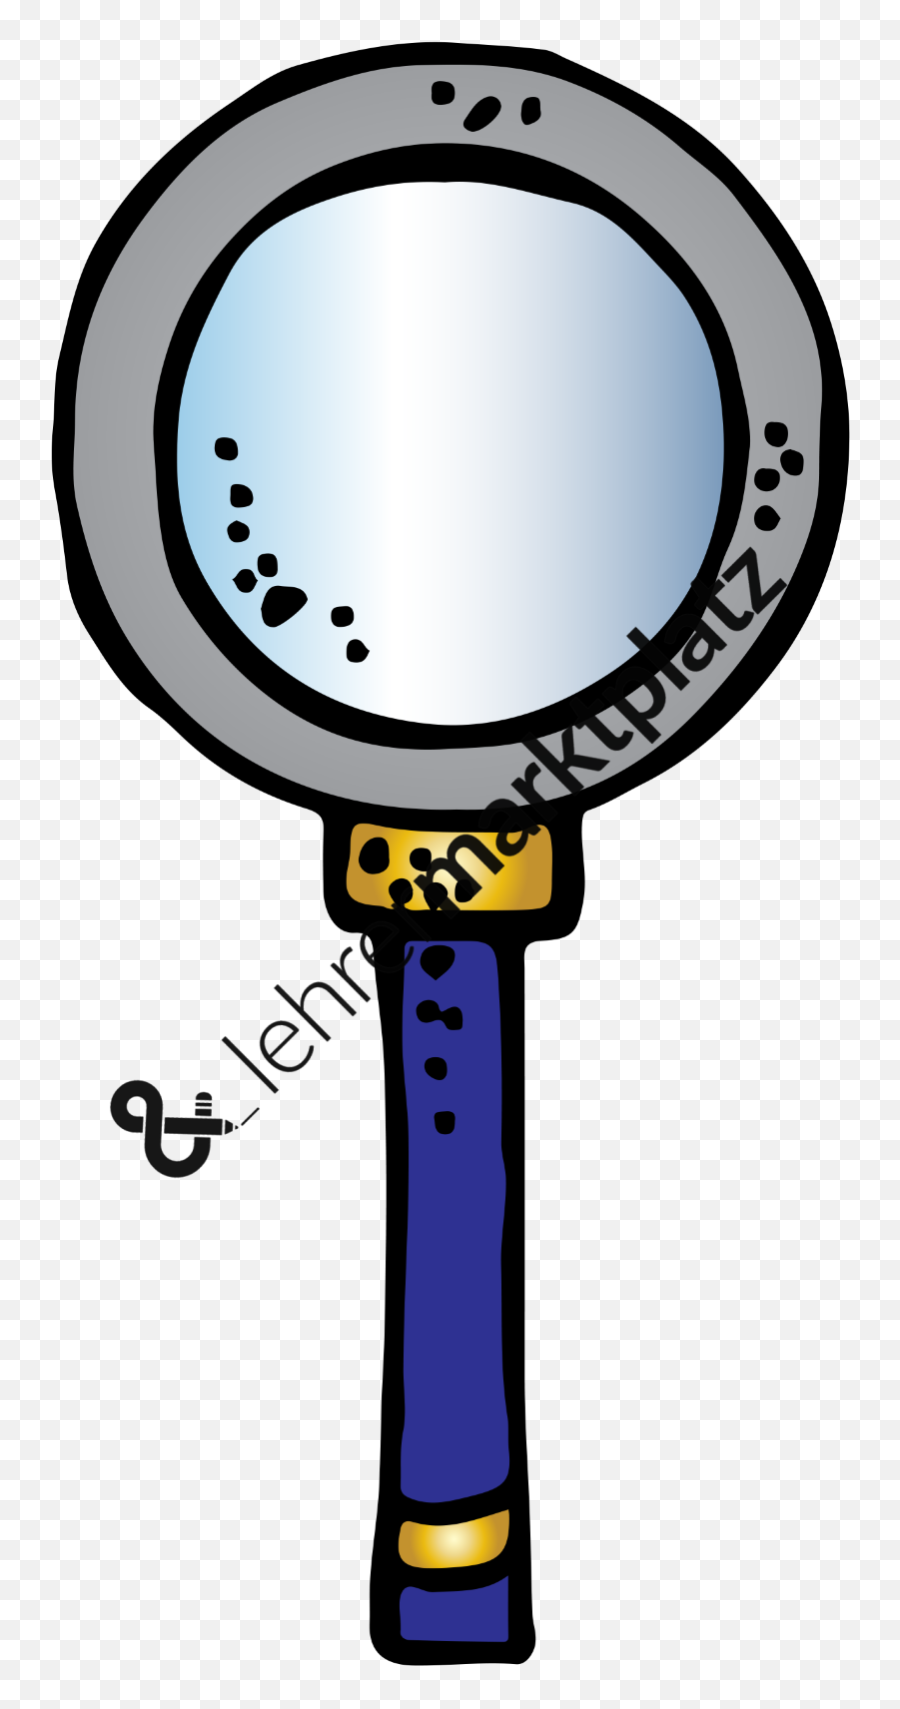 Magnifying Glass Clipart Png - Magnifying Clipart Melonheadz Magnifying Glass Melonheadz Clipart,Magnifying Glass Clipart Png